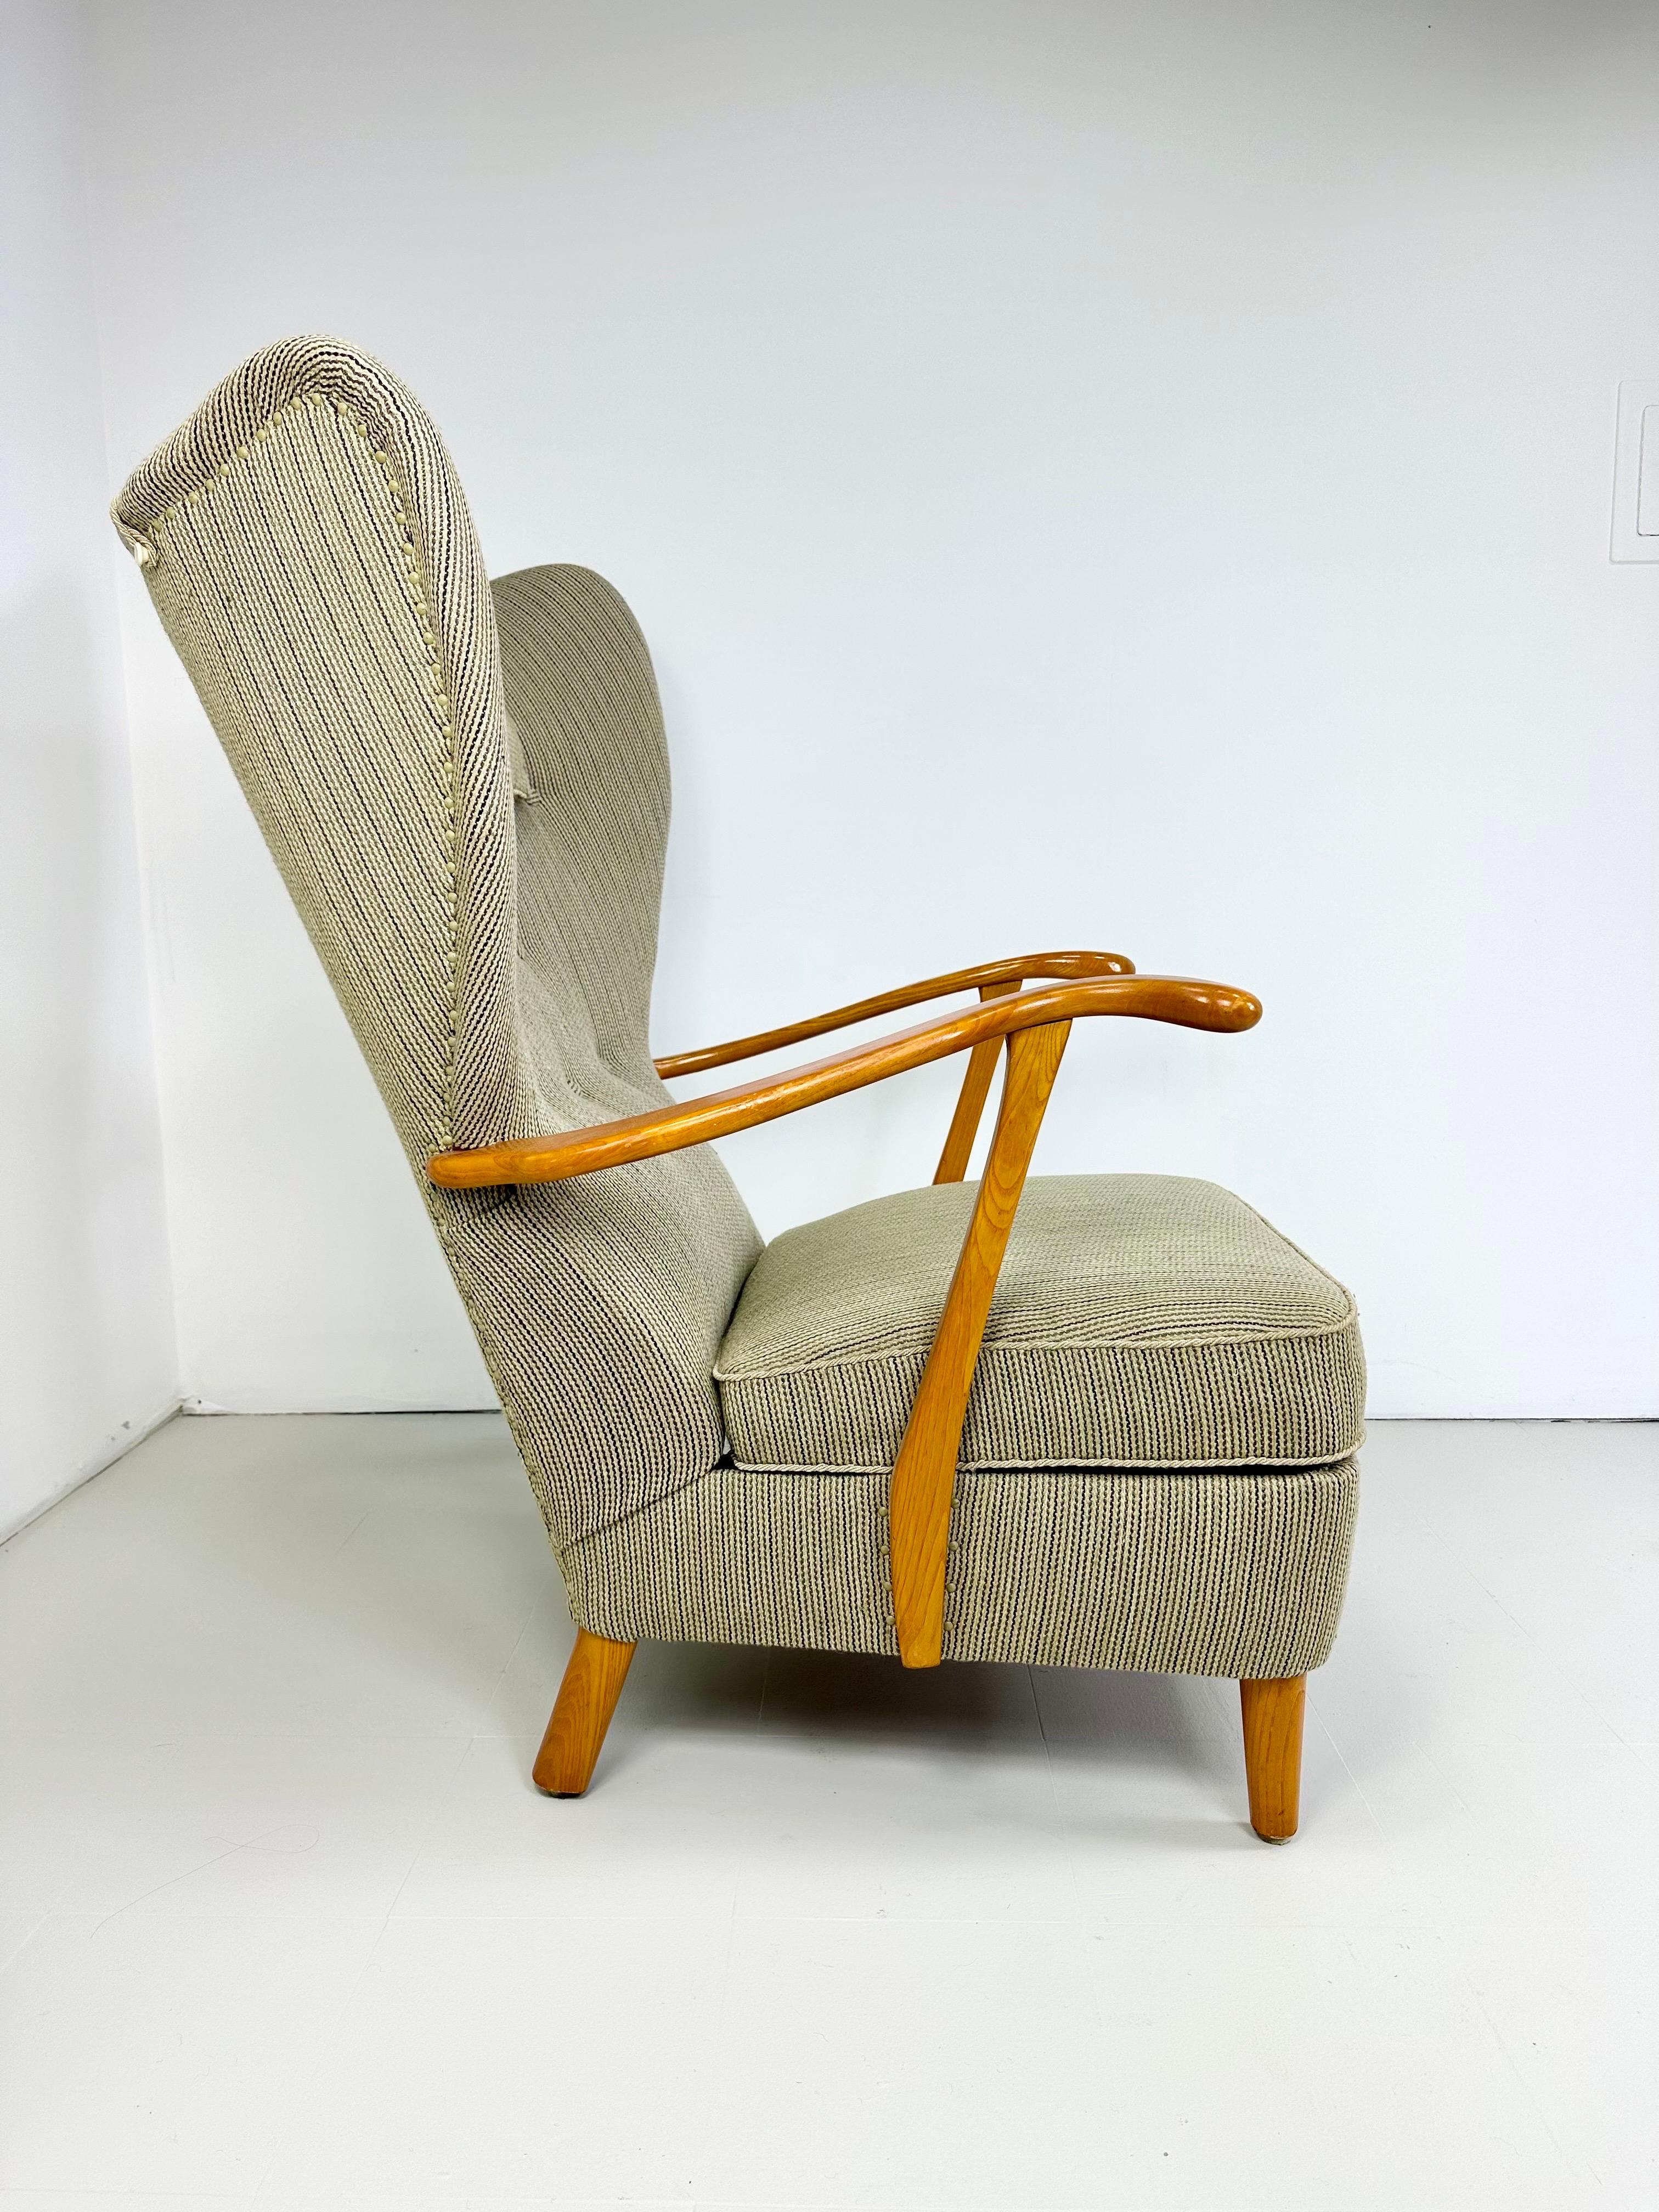 1950’s Highback Swedish Lounge Chair. Beechwood sculpted arms have simple elegant lines. More recent upholstery with bottom back and weighted headrest

Delivery available to NYC area. Please inquire.